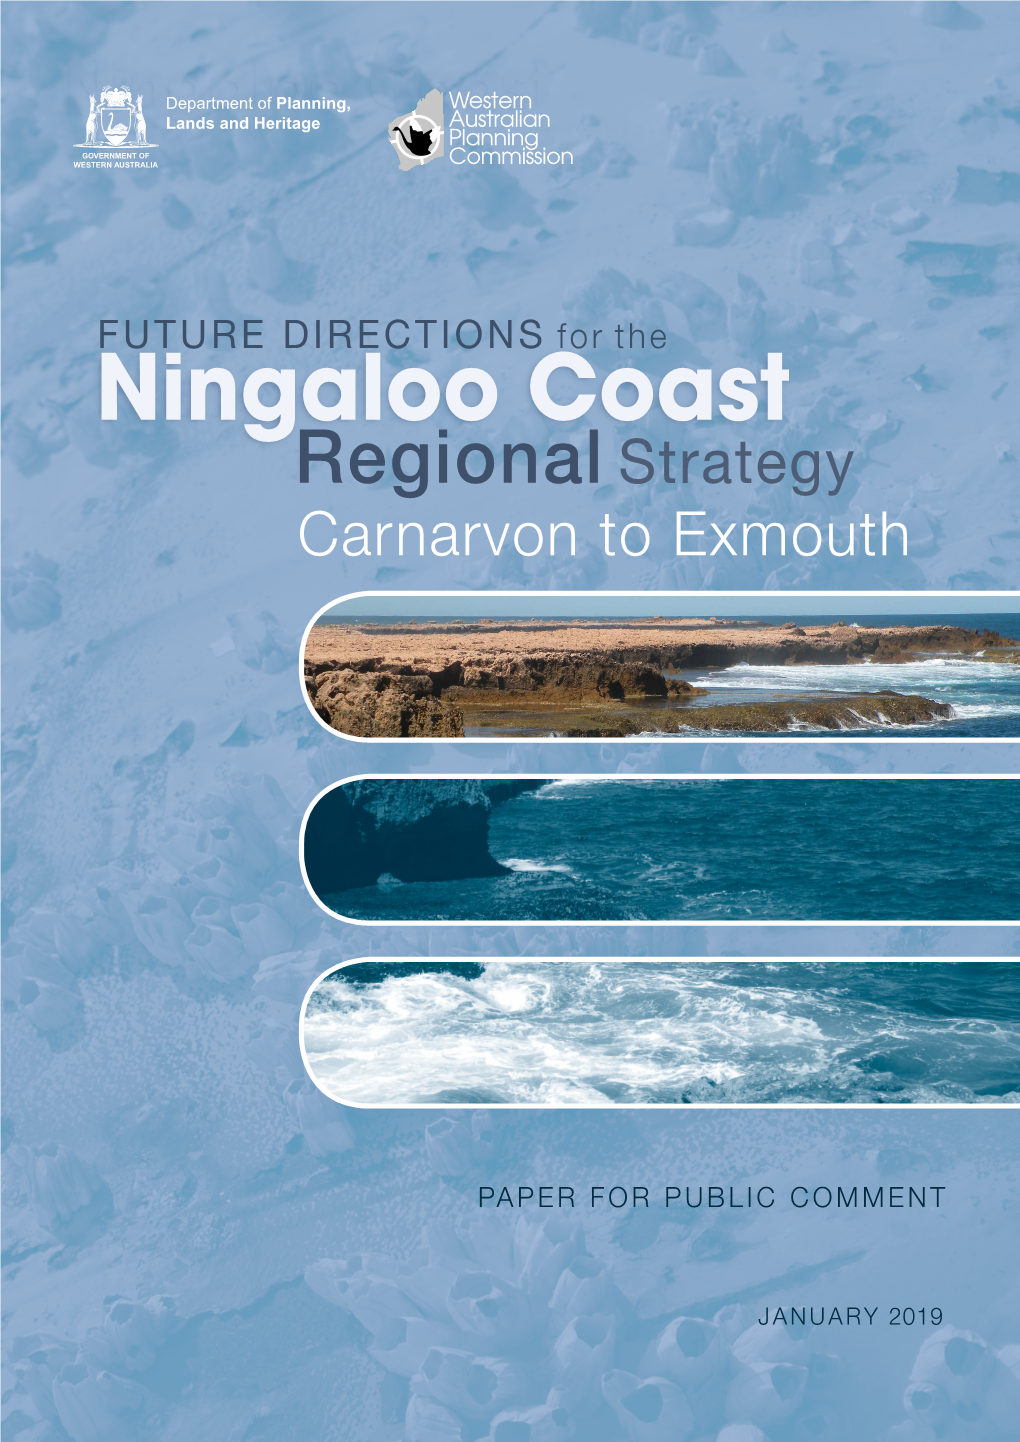 FUTURE DIRECTIONS for the Ningaloo Coast Regional Strategy Carnarvon to Exmouth